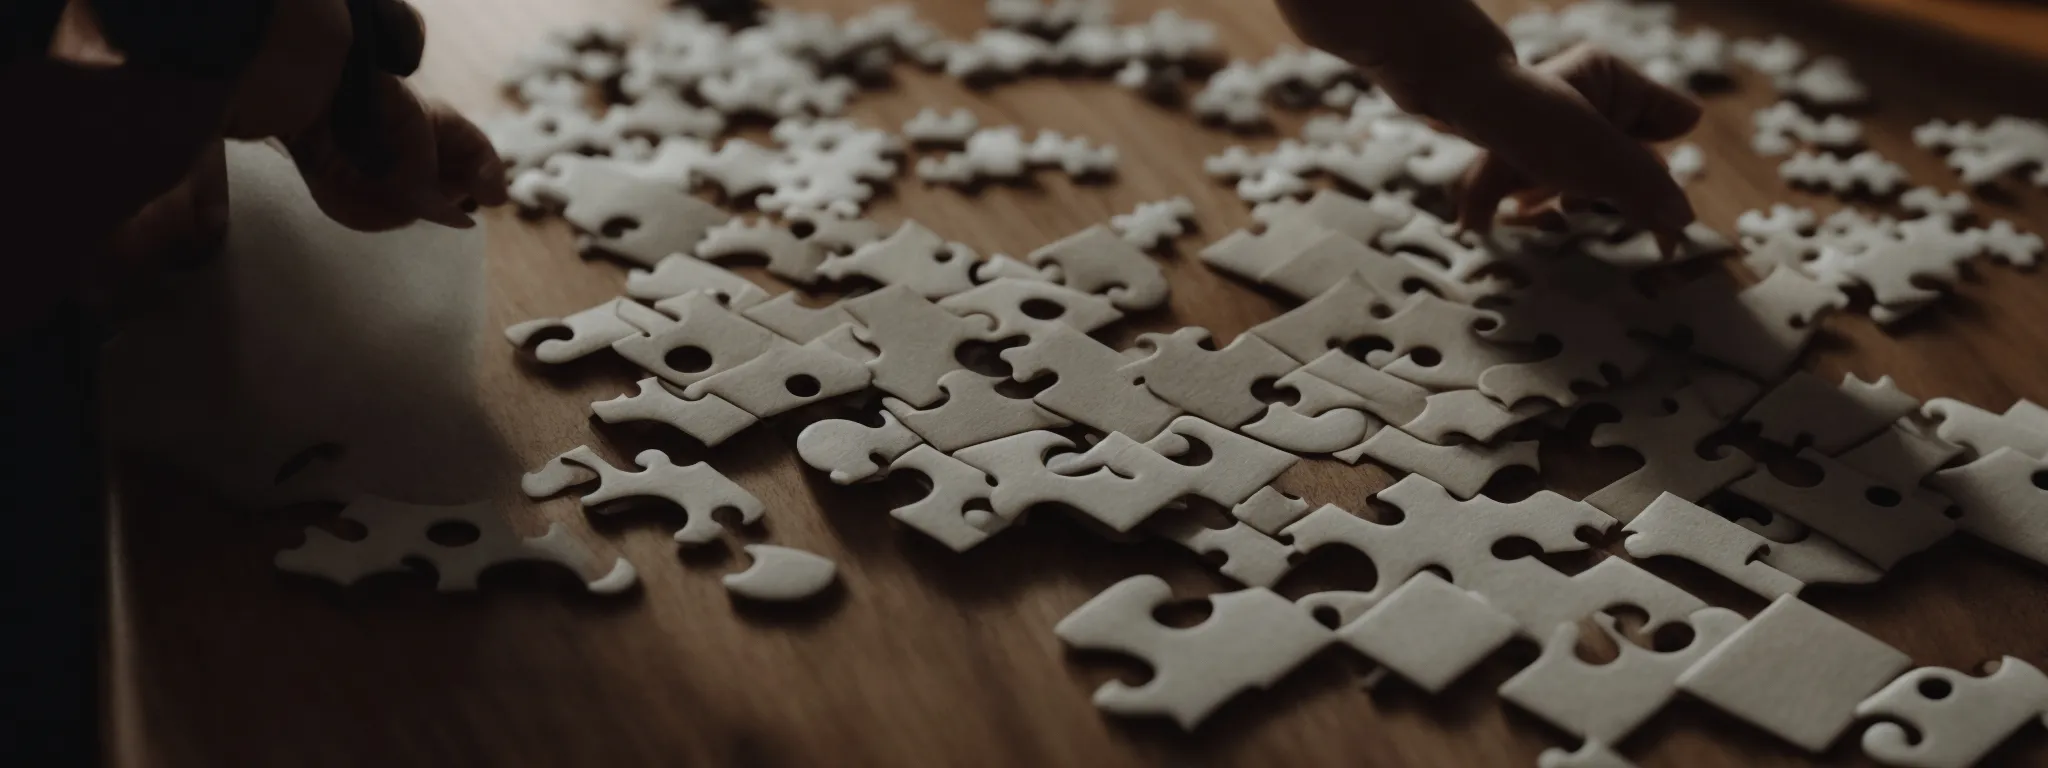 a shadowy figure discreetly connects puzzle pieces on a table, symbolizing strategic link building in seo.